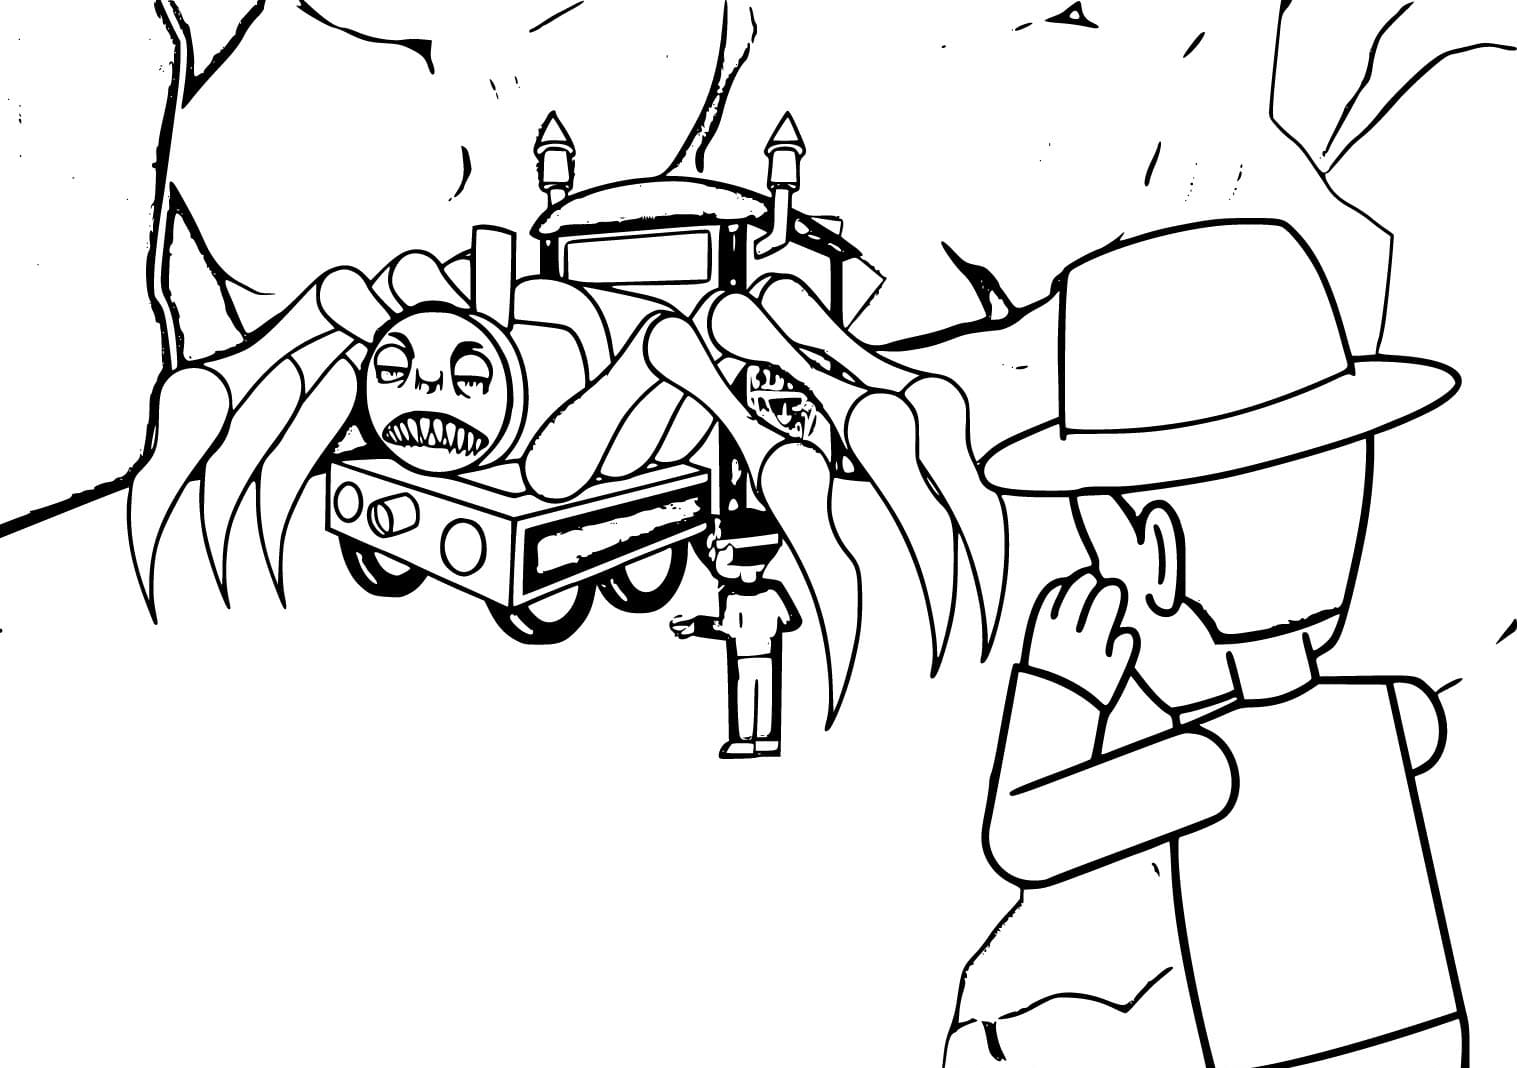 Animated Choo-Choo Charles coloring page - Download, Print or Color ...